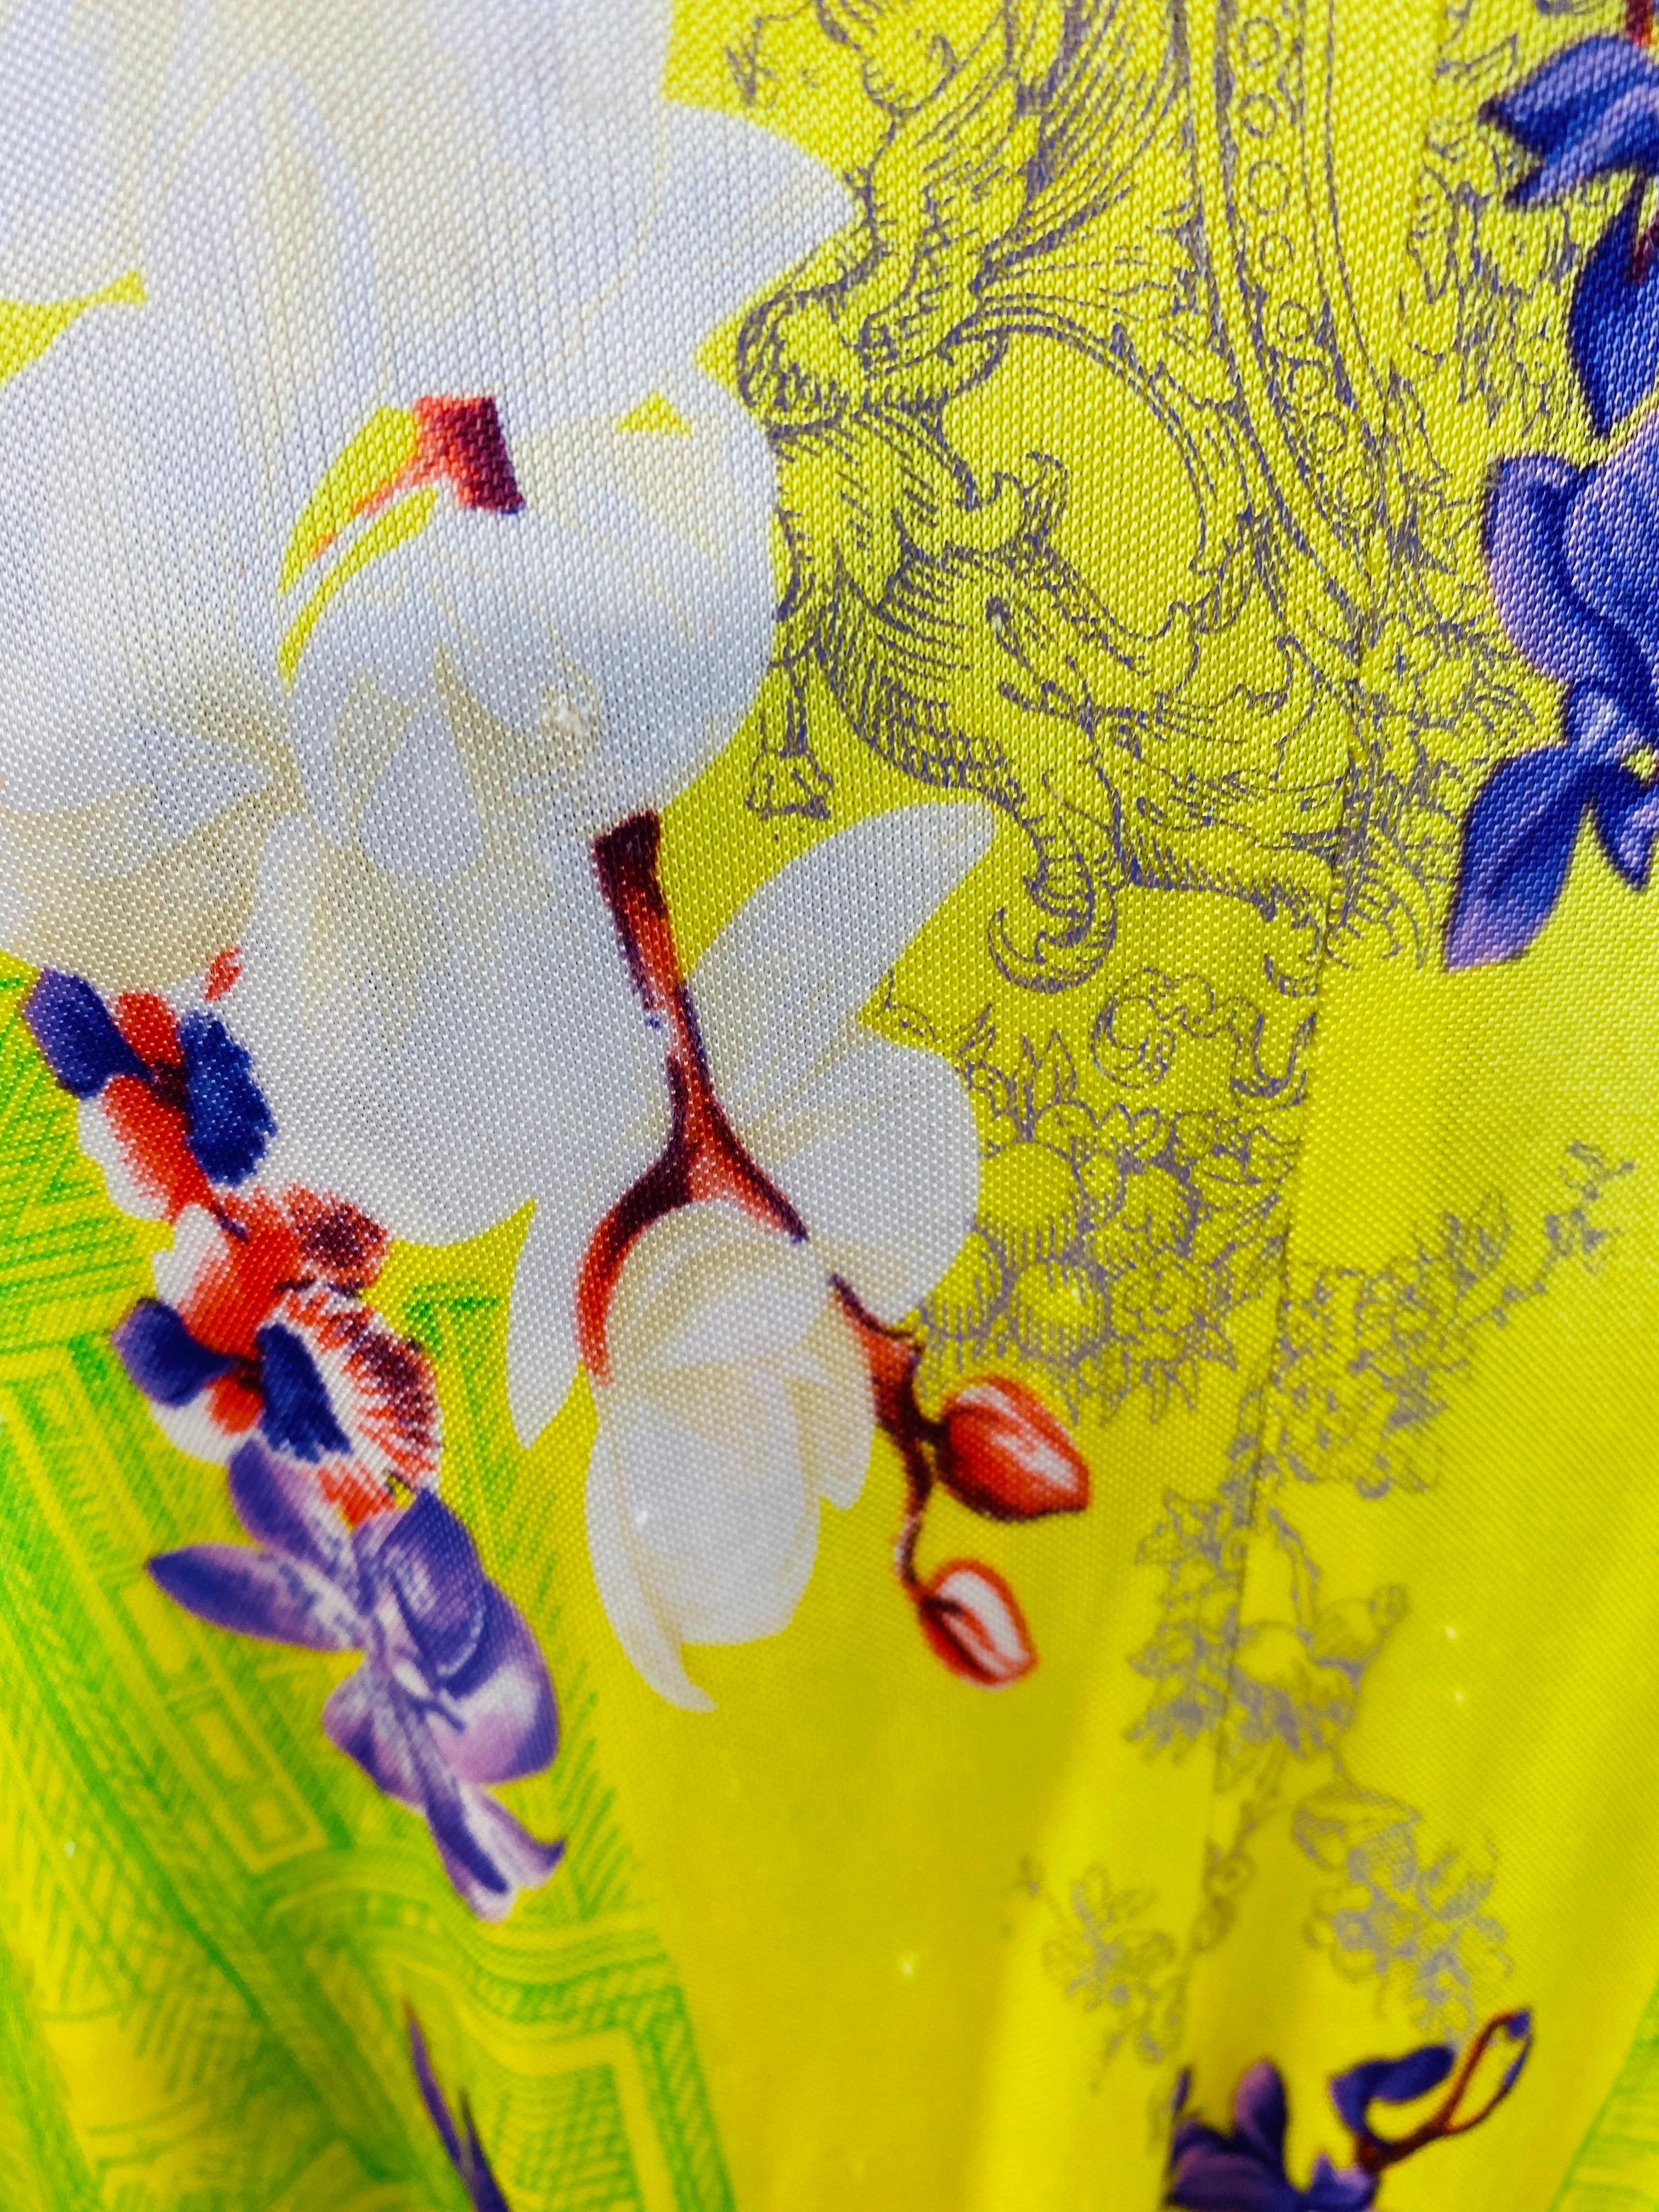 Vintage S/S 2004 Versace Dress Bright Yellow + Purple Orchid Floral Runway For Sale 15